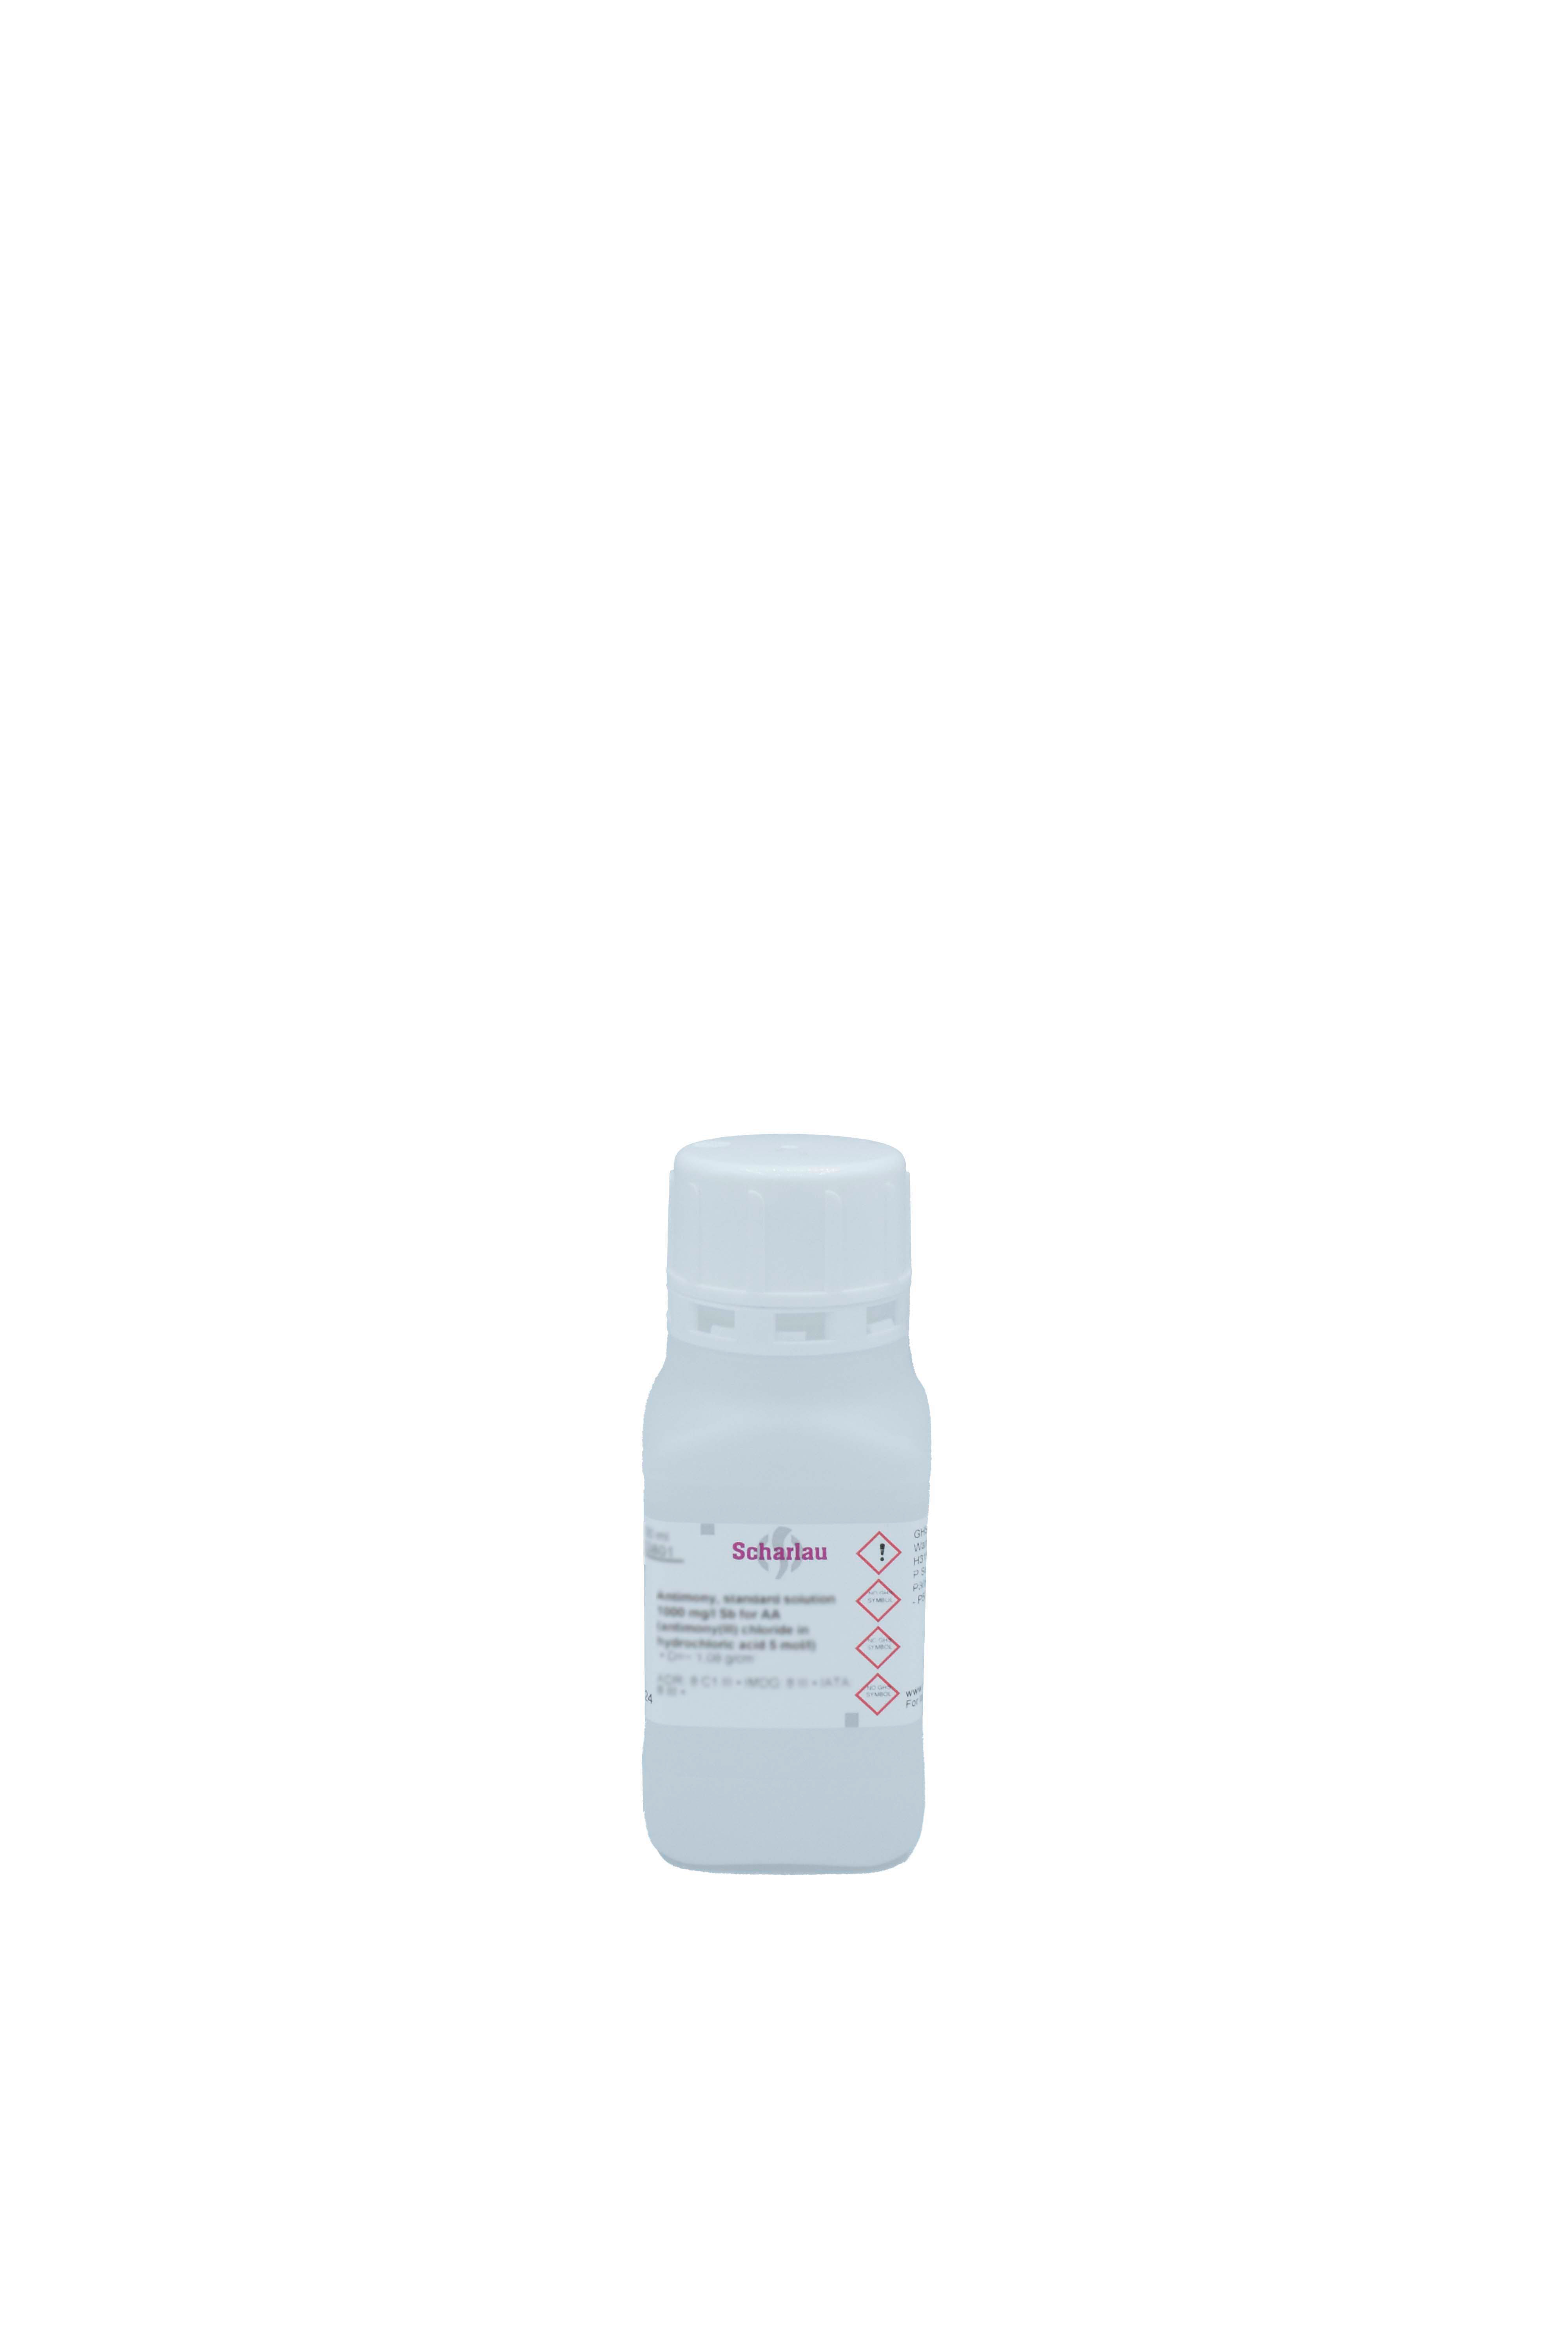 Strontium, standard solution 1000 mg/l Sr for AAsS (strontium nitrate in HNO3 0,5 mol/l) 